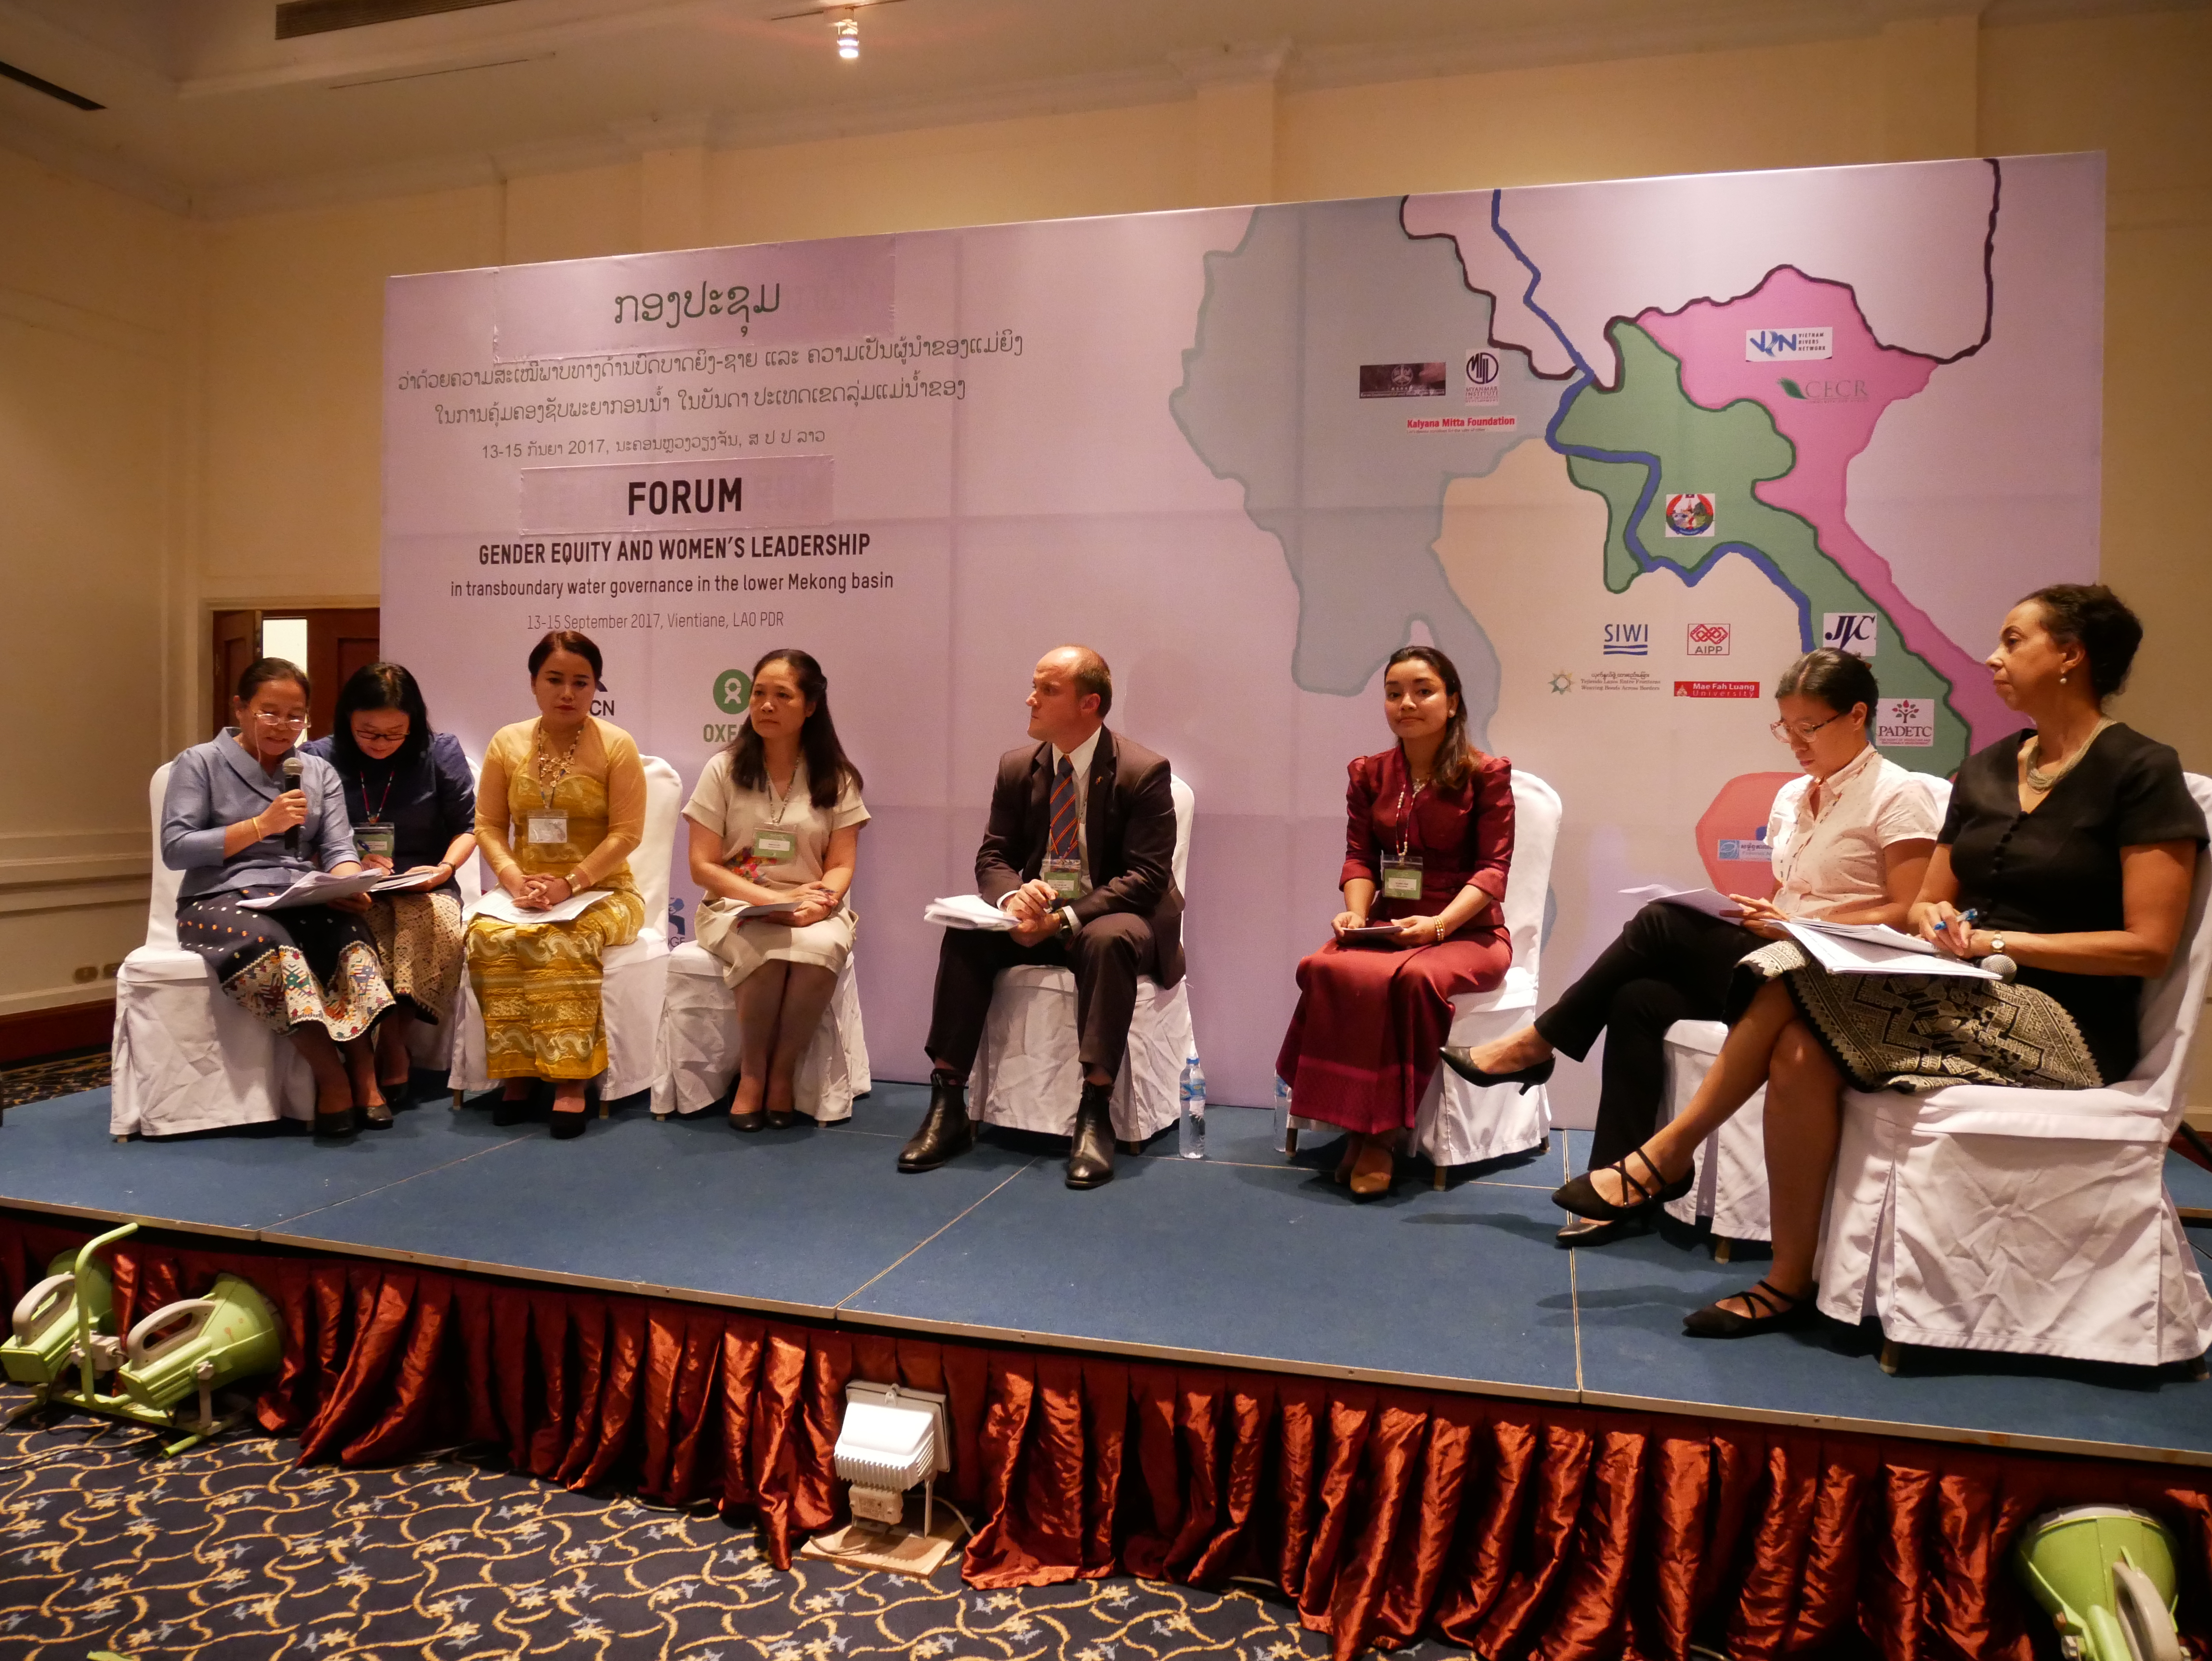 six women and two men sit on a low stage in front of a large map of Indo-Burma